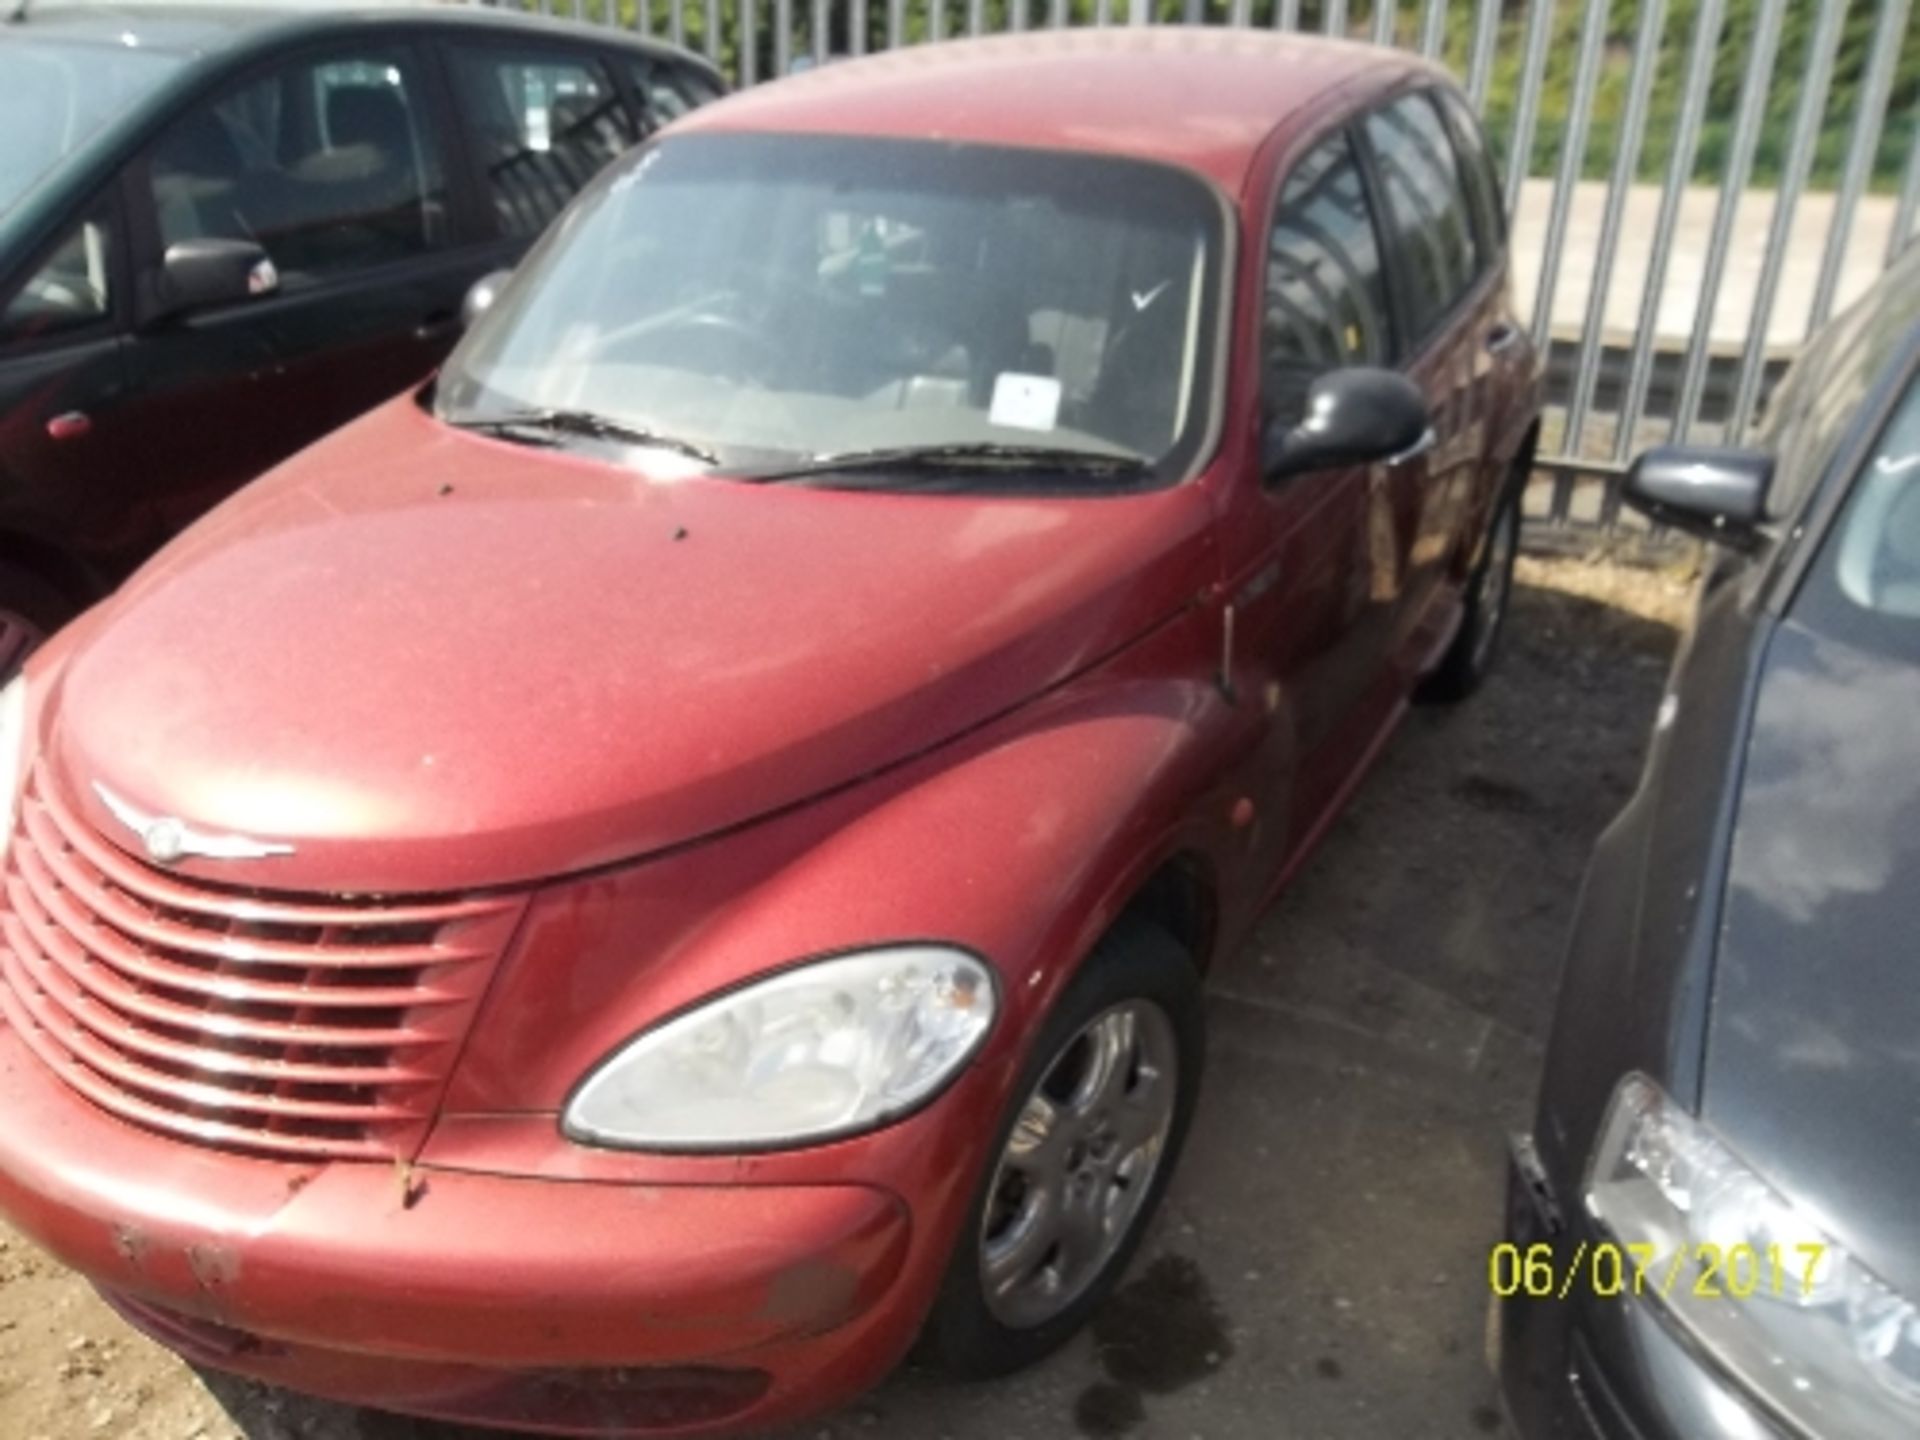 Chrysler PT Cruiser Limited Edition - X391 VGC Date of registration: 02.02.2001 1996cc, petrol, - Image 4 of 4